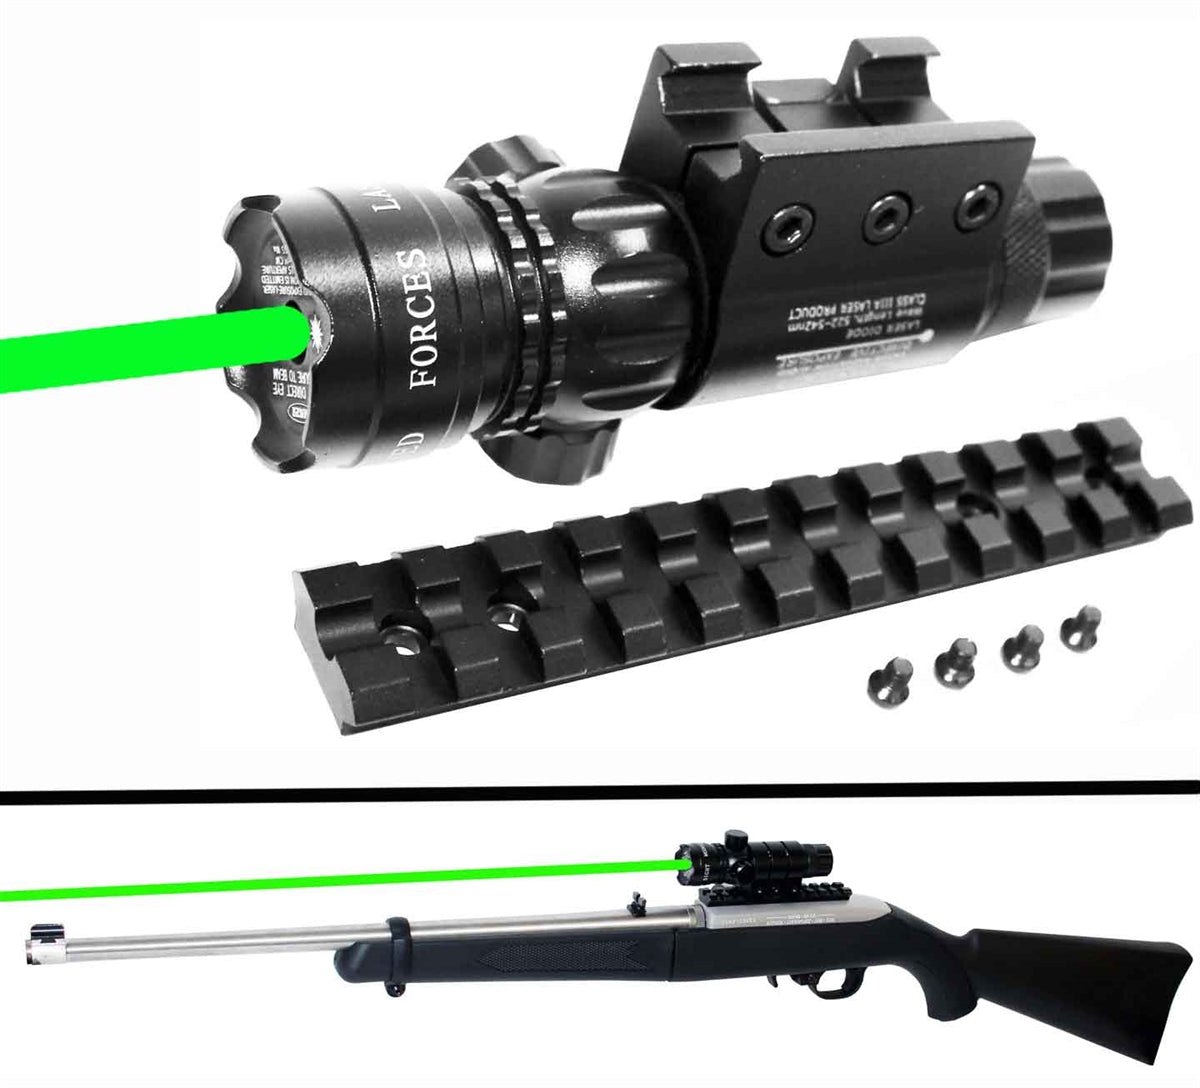 ruger 10/22 model green dot laser sight and picatinny rail mount combo.